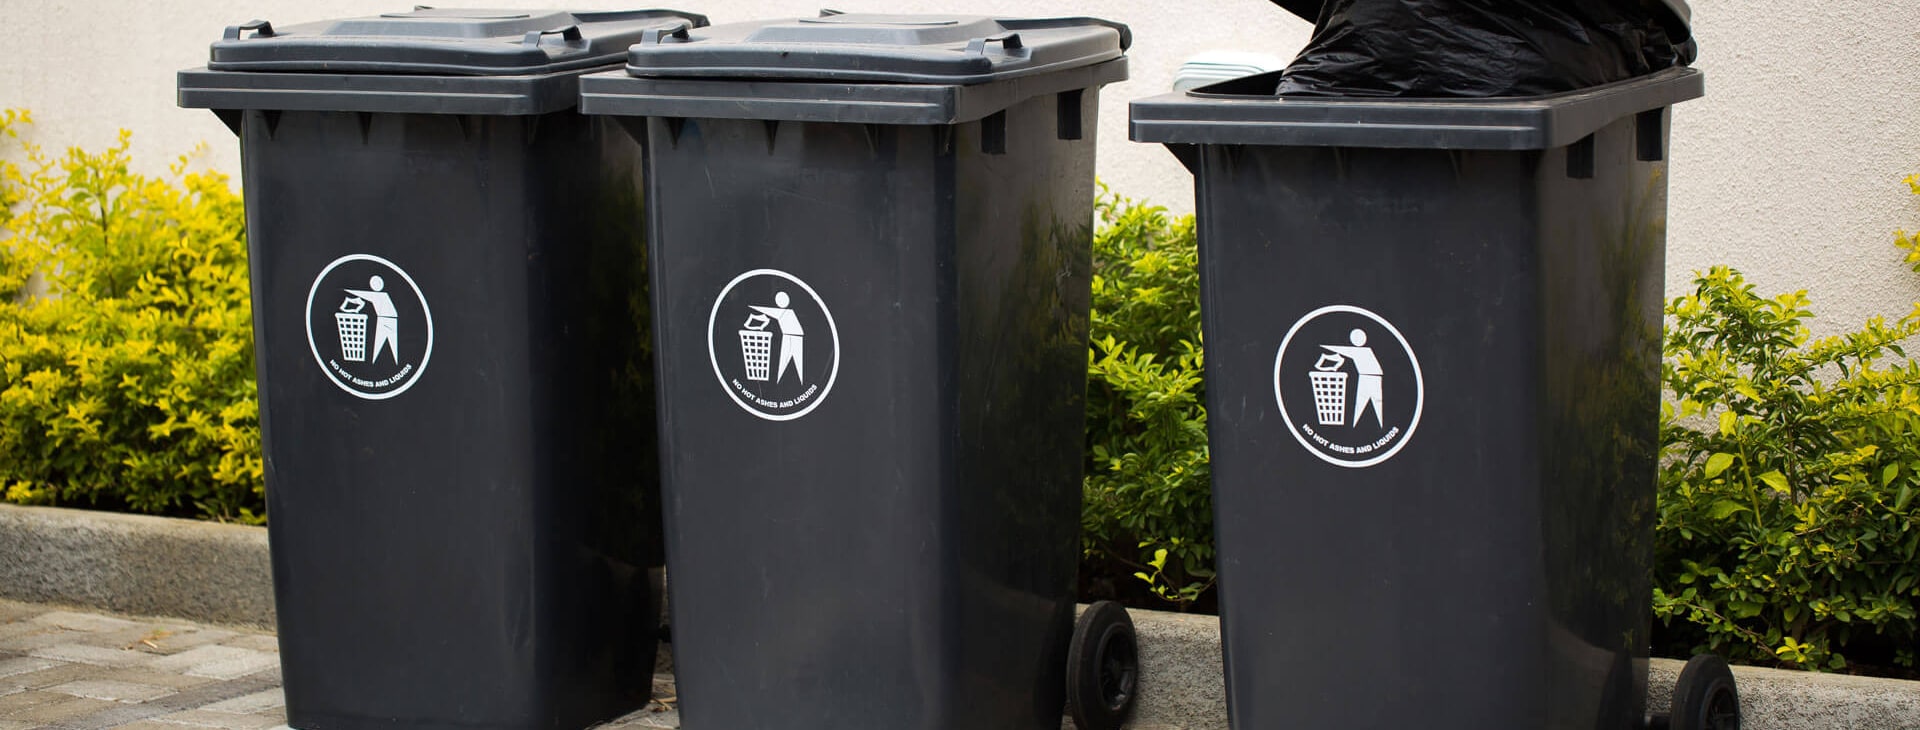 three plastic garbage cans on a concrete slab in front of bushes for the durable goods market